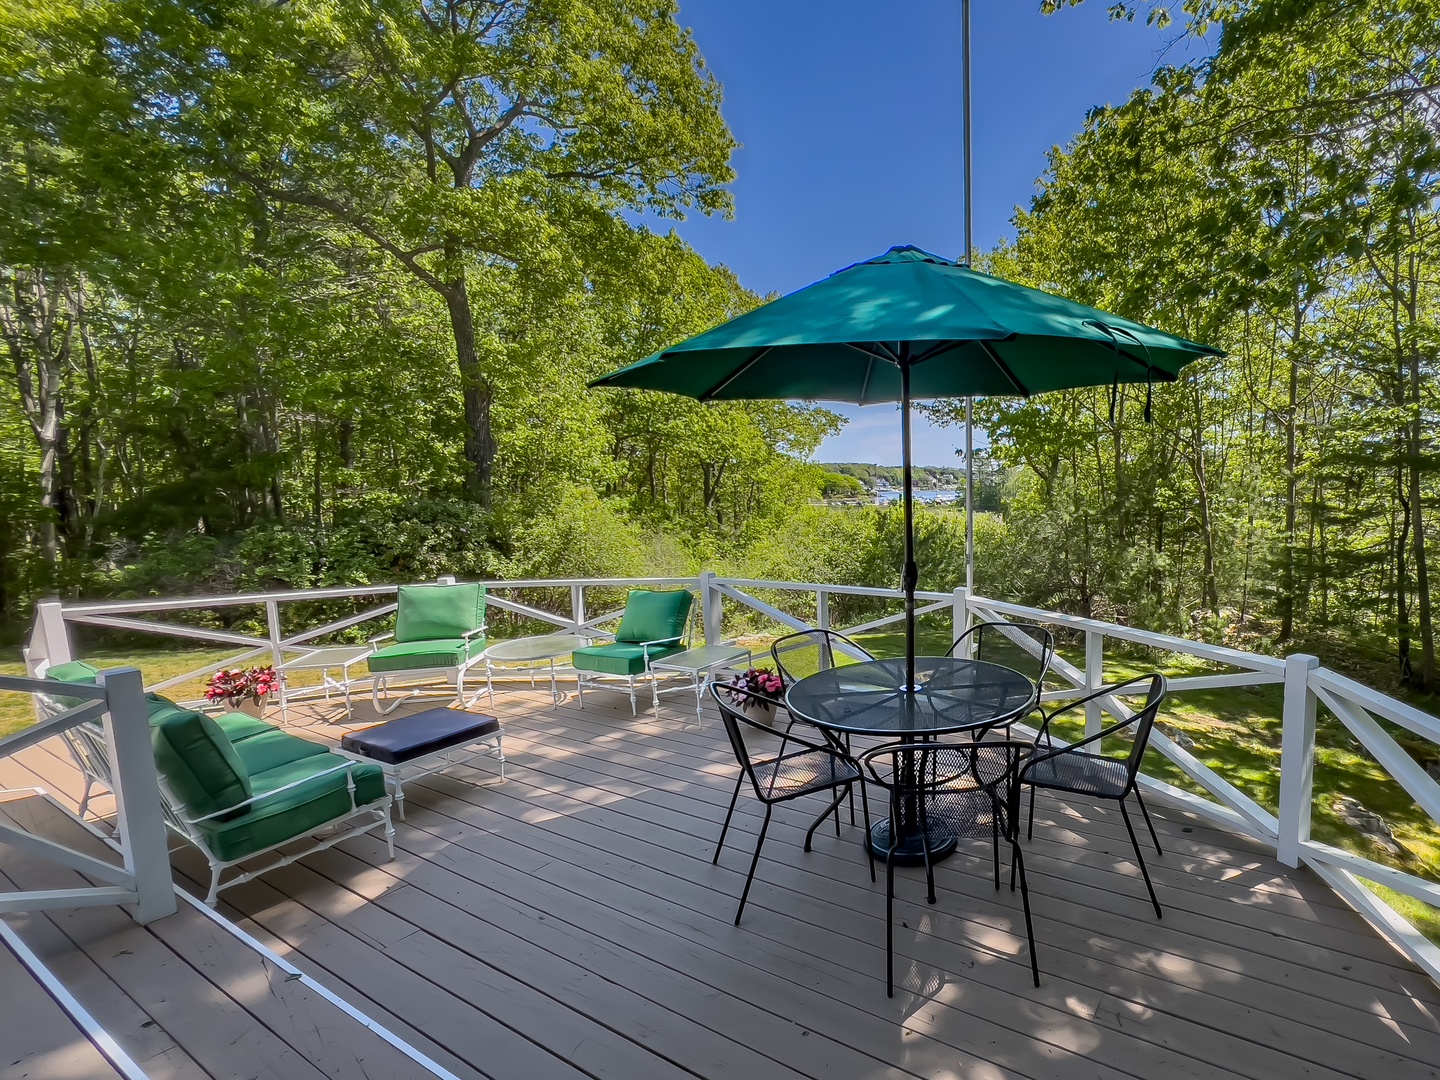 The communal deck is ideal for enjoying the sunshine & fresh air